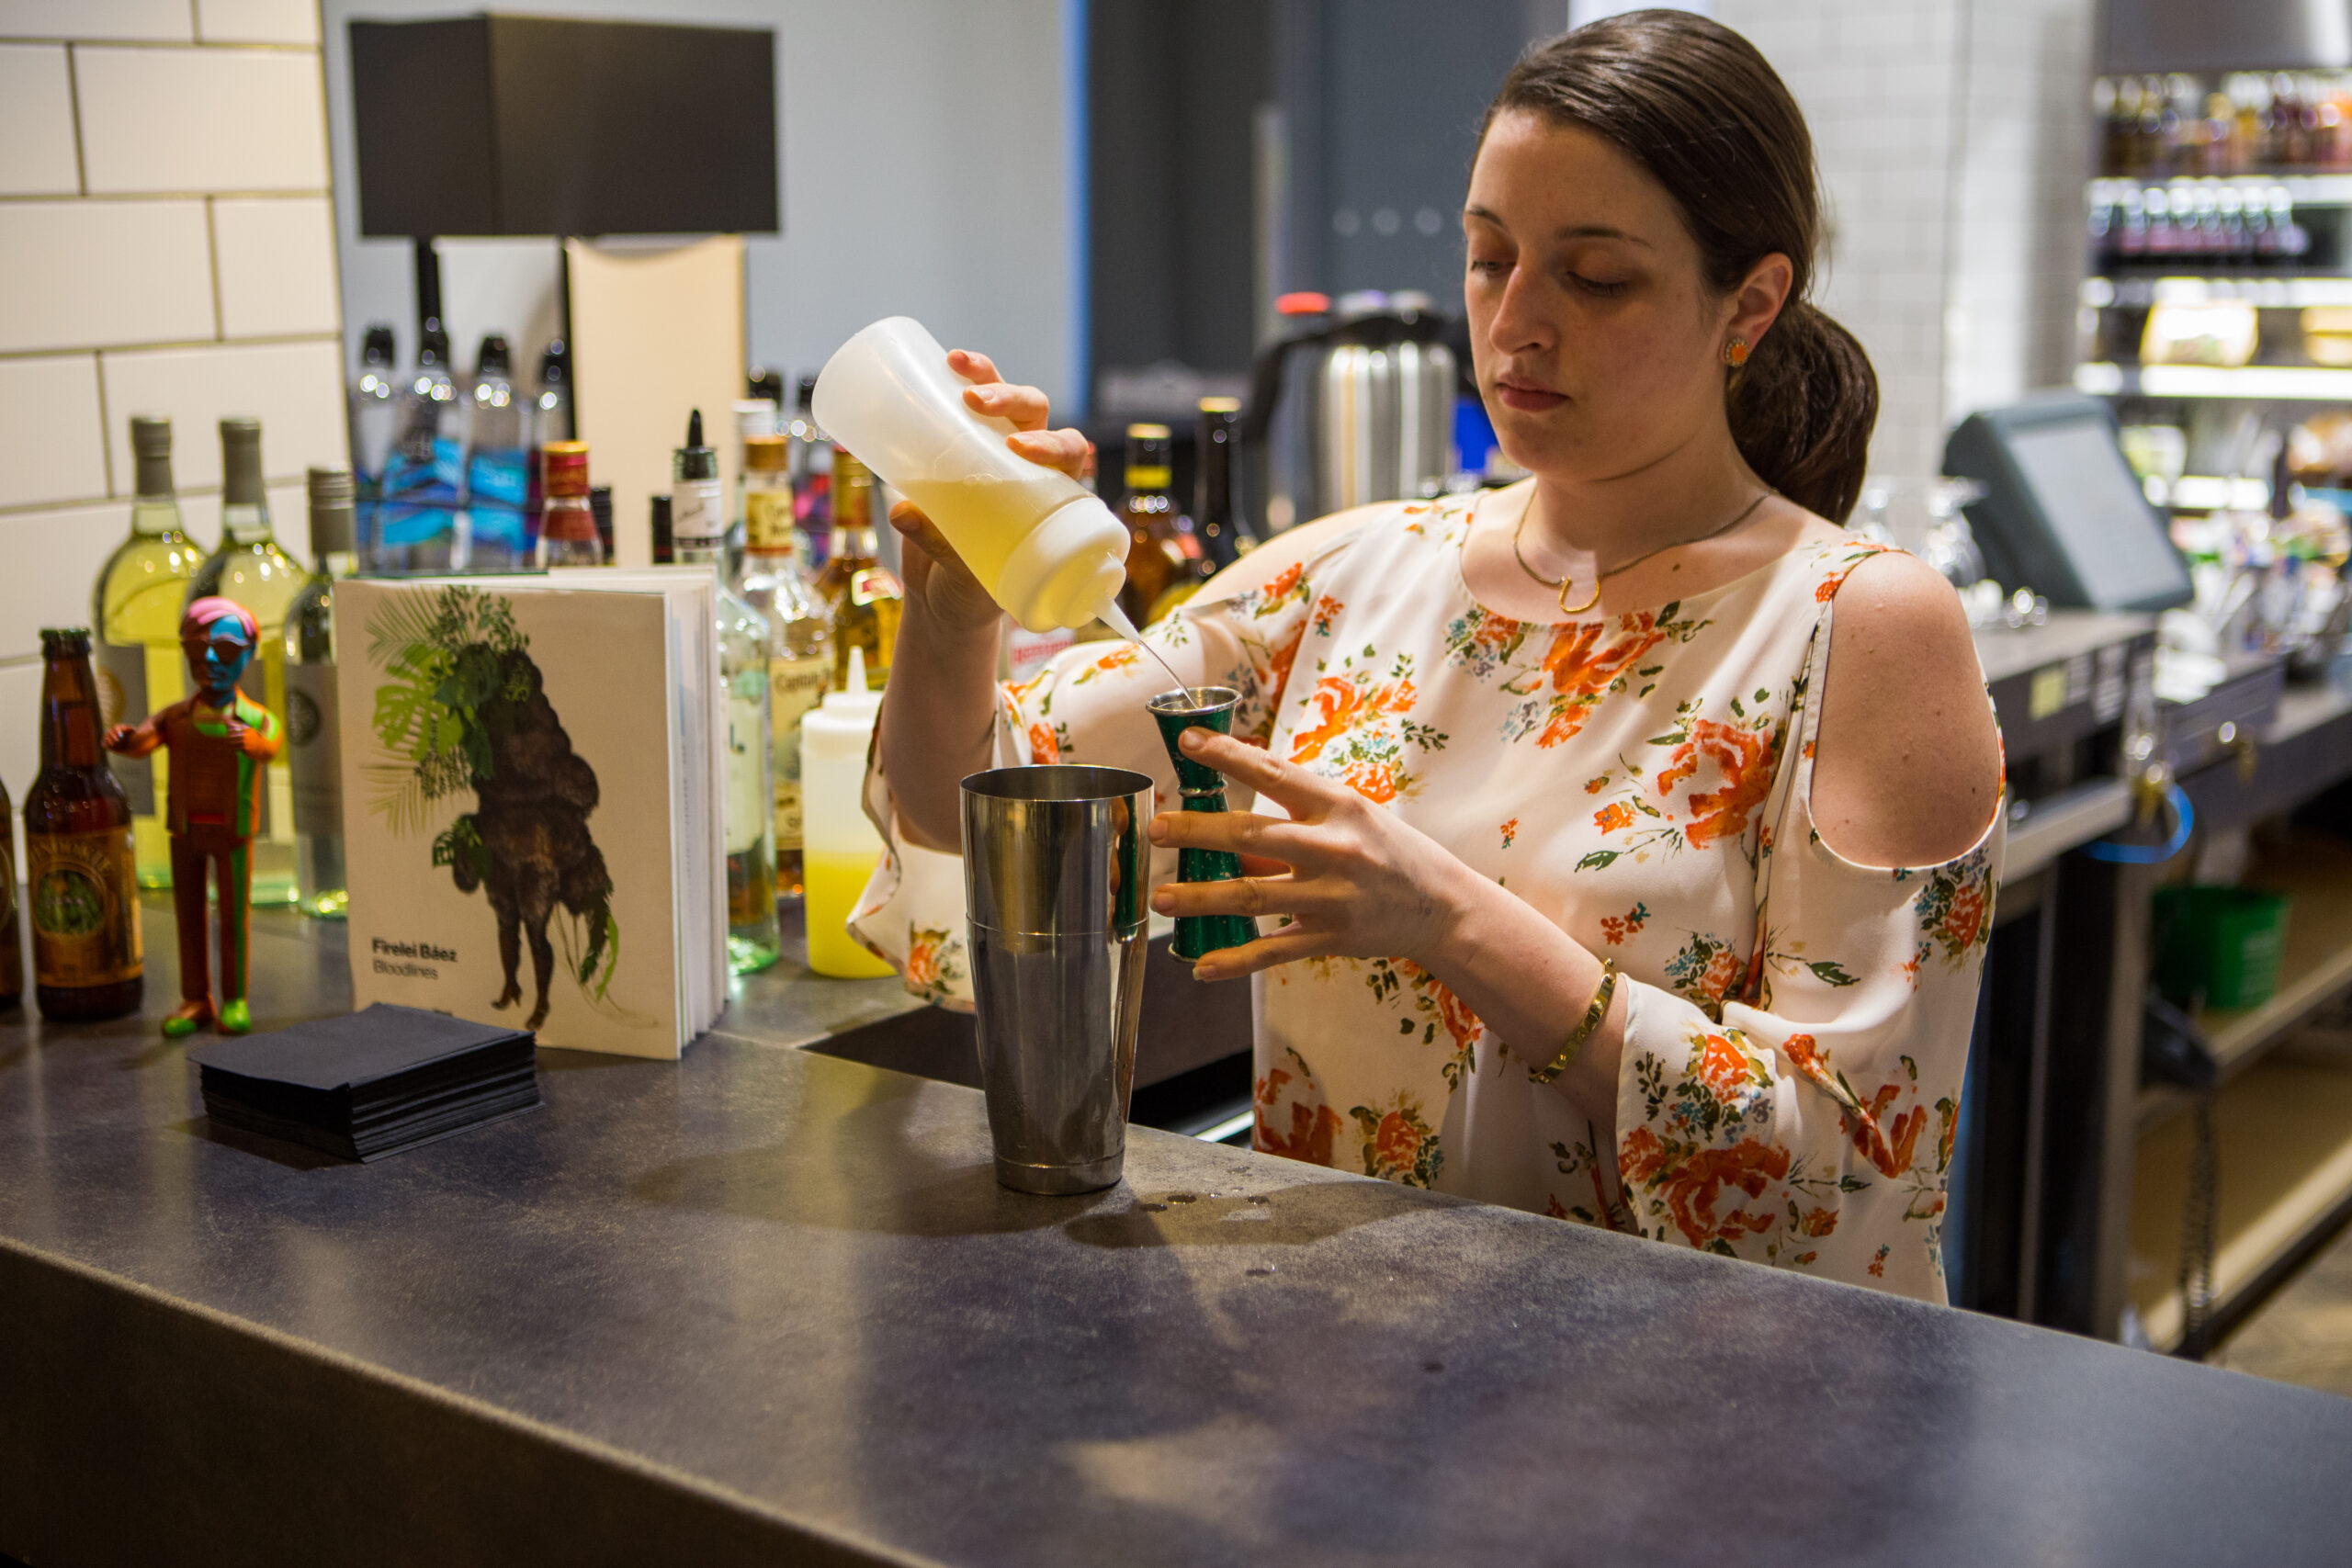 A woman in a floral print shirt mixes a drink at the Warhol Cafe during a Sip and Sketch event.